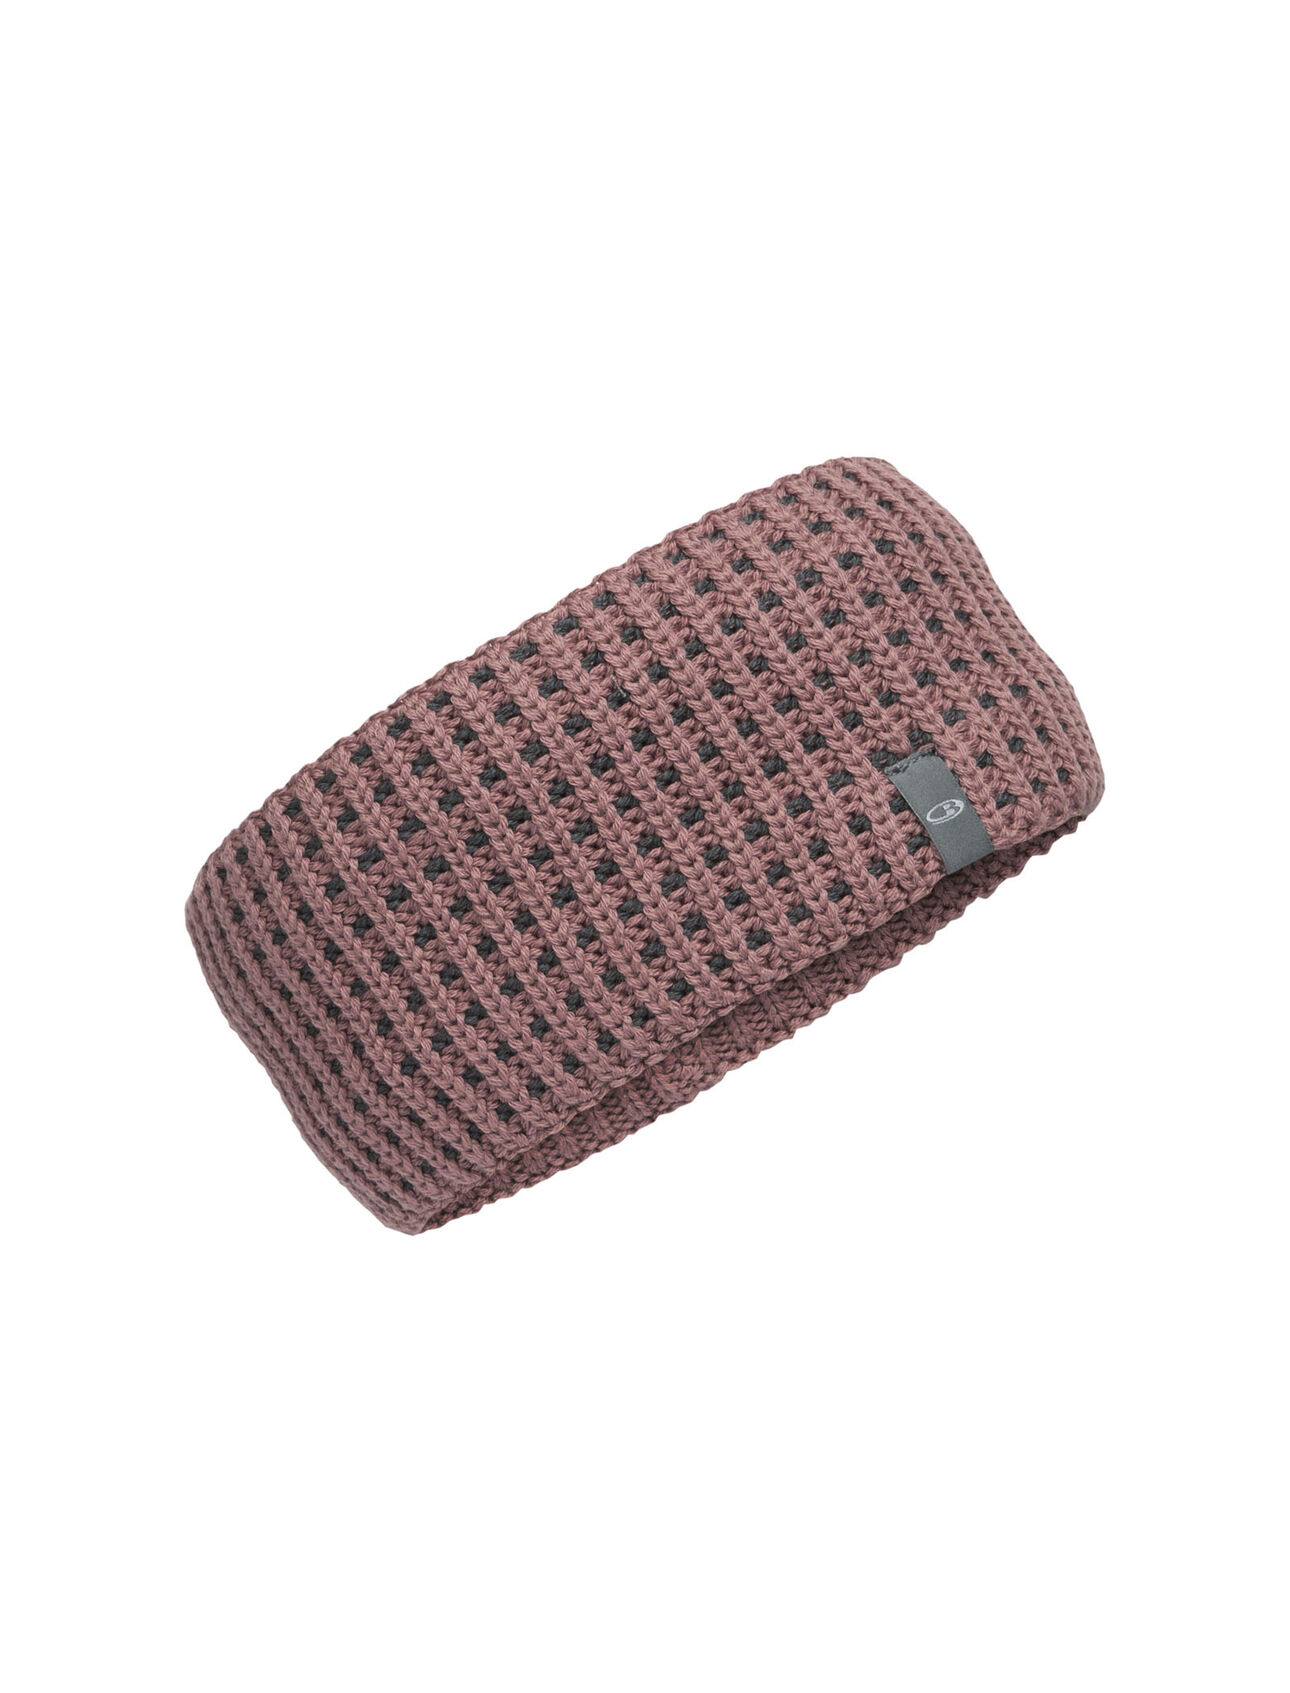 Unisex Merino Affinity Headband  Made with a sustainable blend of merino wool and organic cotton, our Affinity Headband provides natural warmth with a soft 100% merino wool lining for added comfort. 